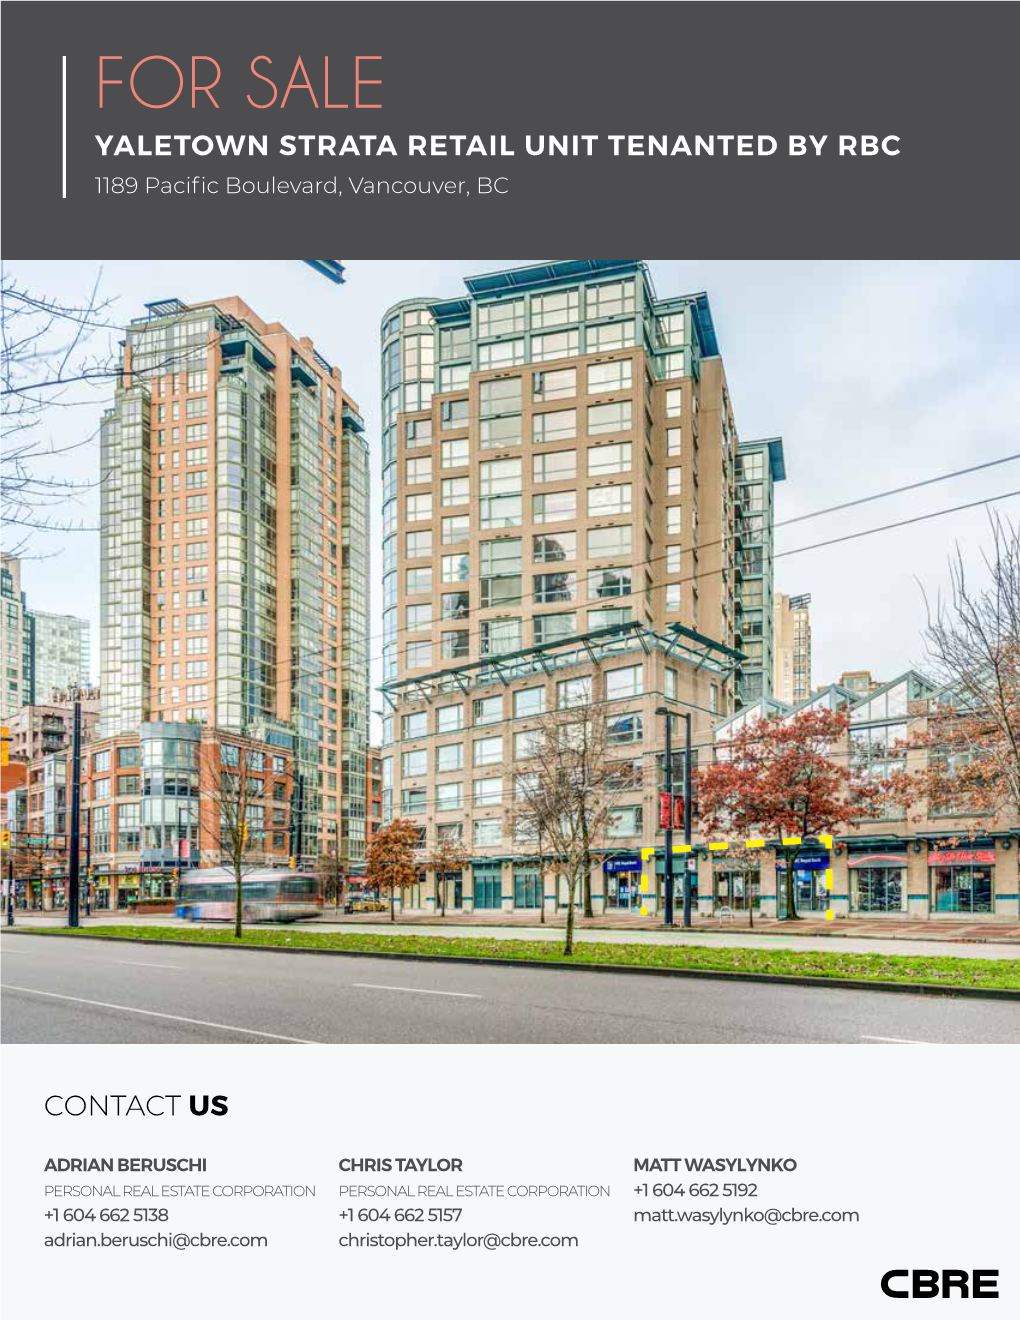 FOR SALE YALETOWN STRATA RETAIL UNIT TENANTED by RBC 1189 Pacific Boulevard, Vancouver, BC